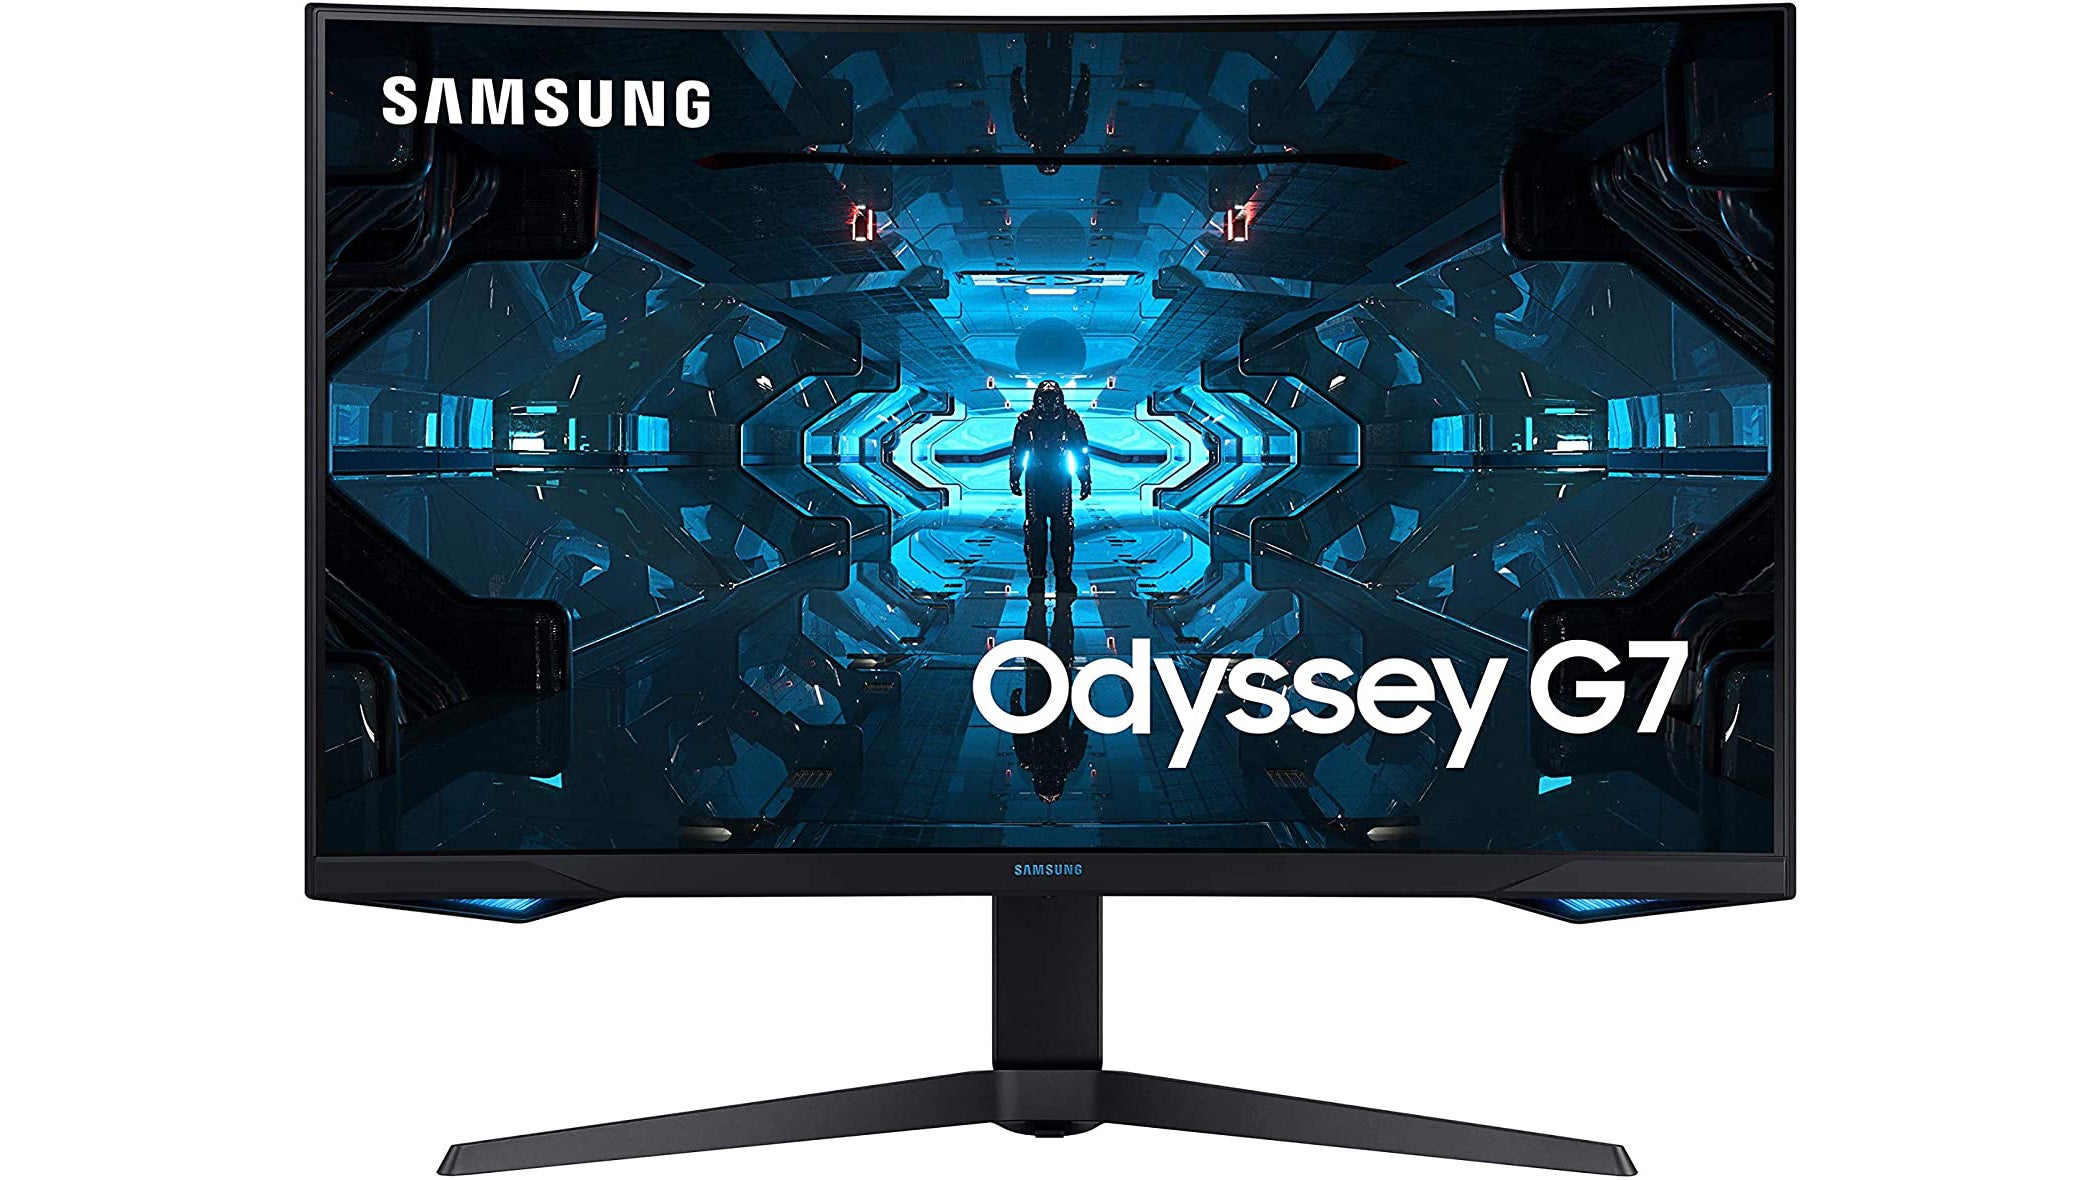 Pick up the 32-in Samsung Odyssey G7 gaming monitor for £499 after a £100 discount thumbnail